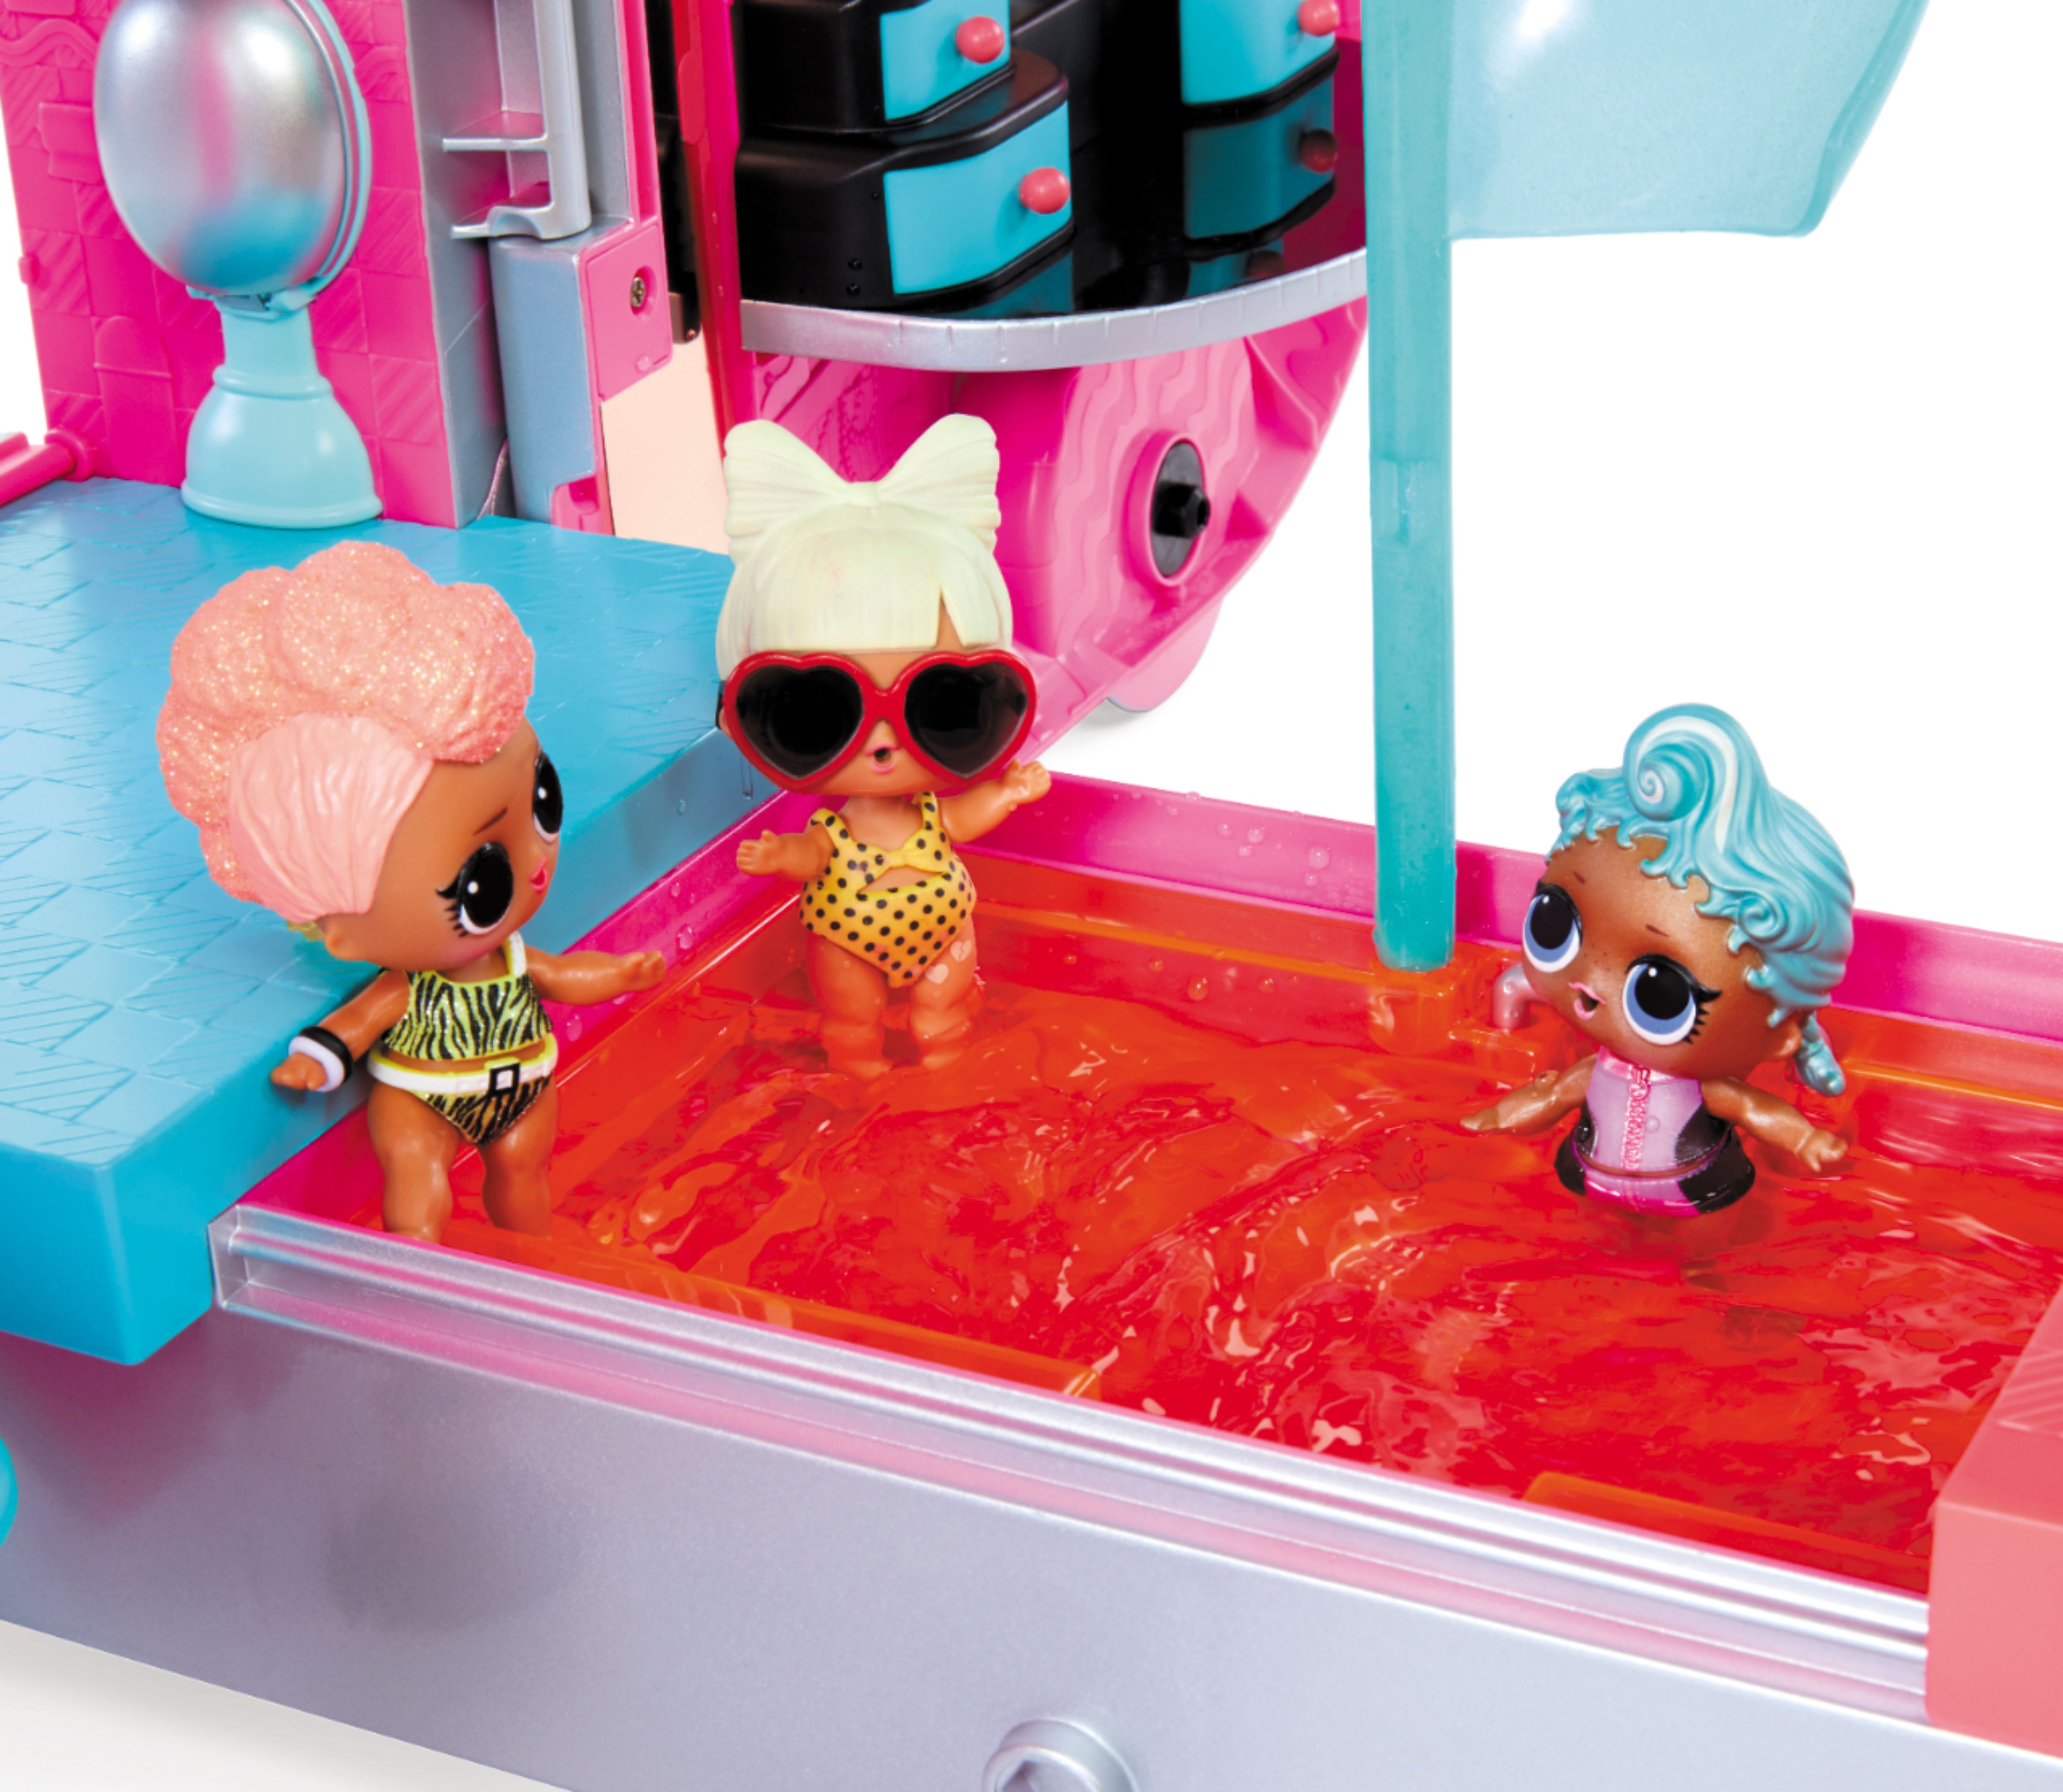 🍒 LOL Surprise OMG Glamper Fashion Camper Doll Playset for Kids➔  **Instructions & Review** 